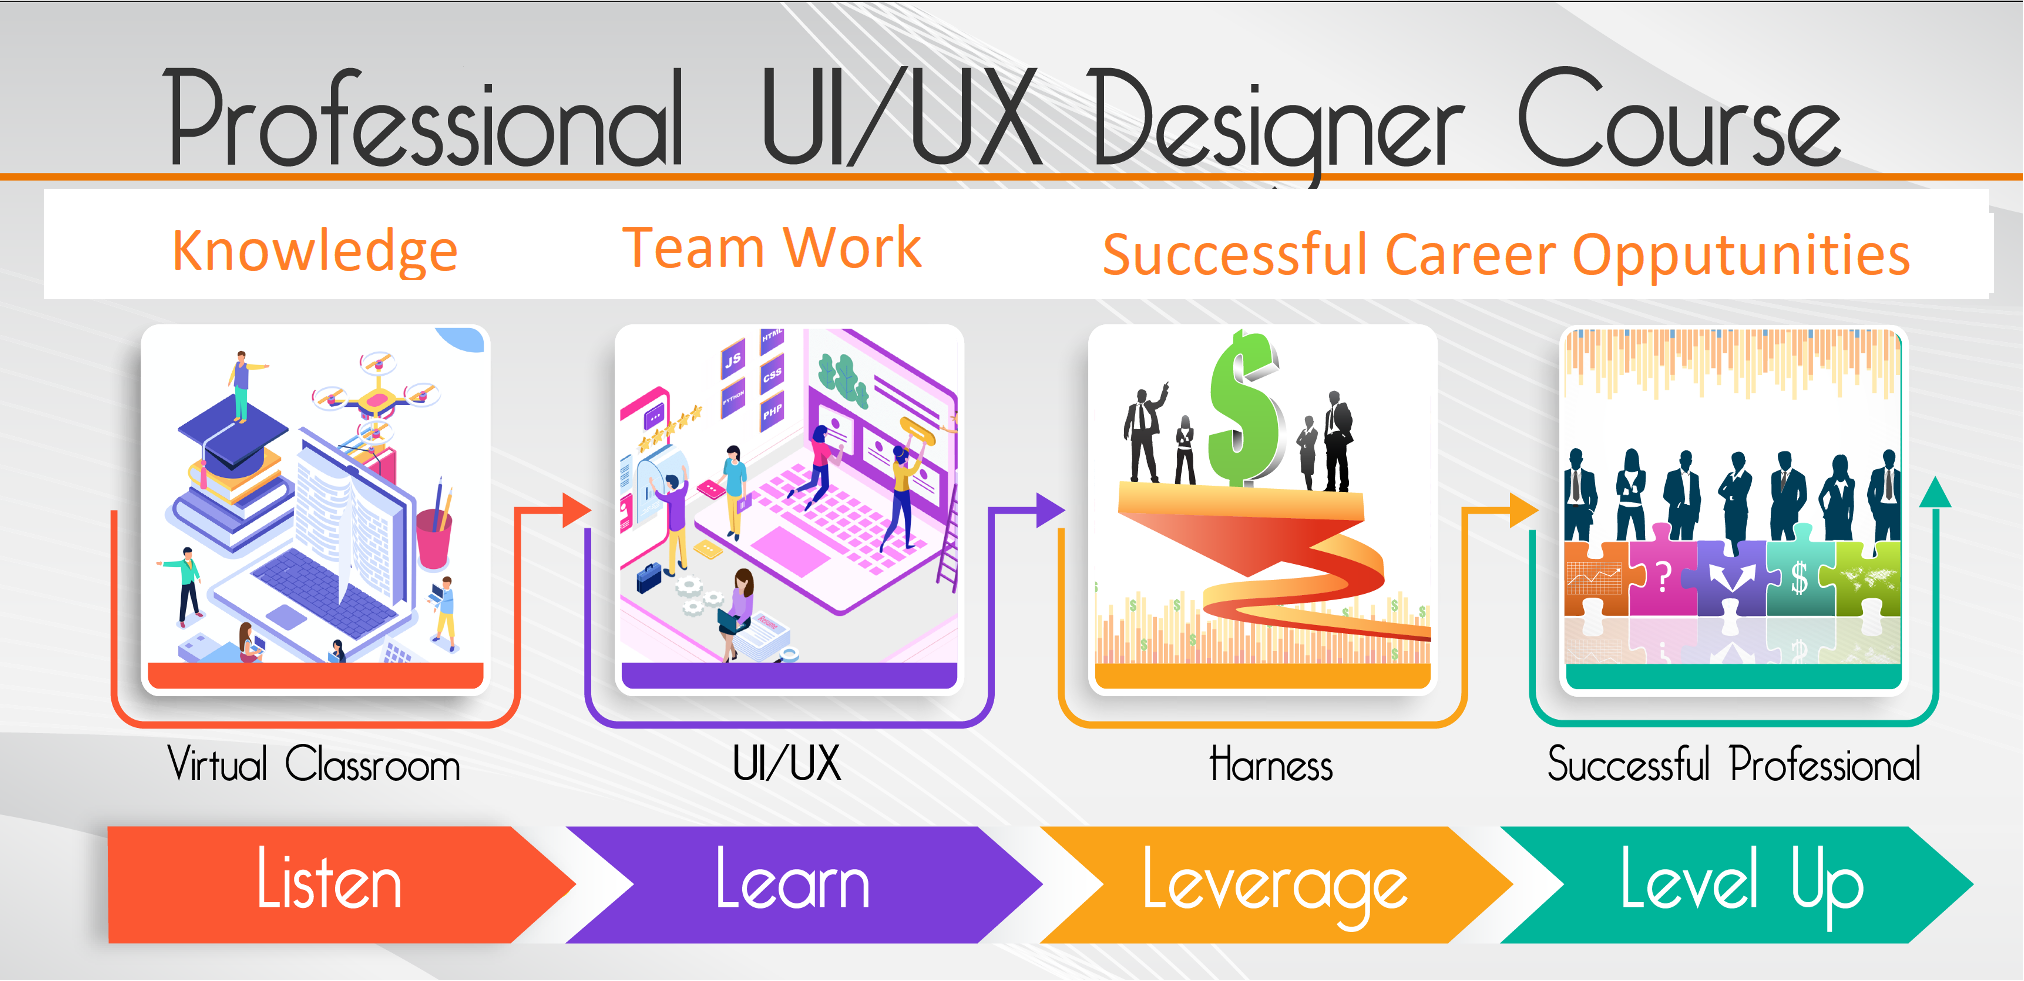 Professional UX Designer learning order skills that display 1. Acquiring Knowledge 2. Learning the design tools and 3, Application of knowledge by working on real life like projects in a team based environment.